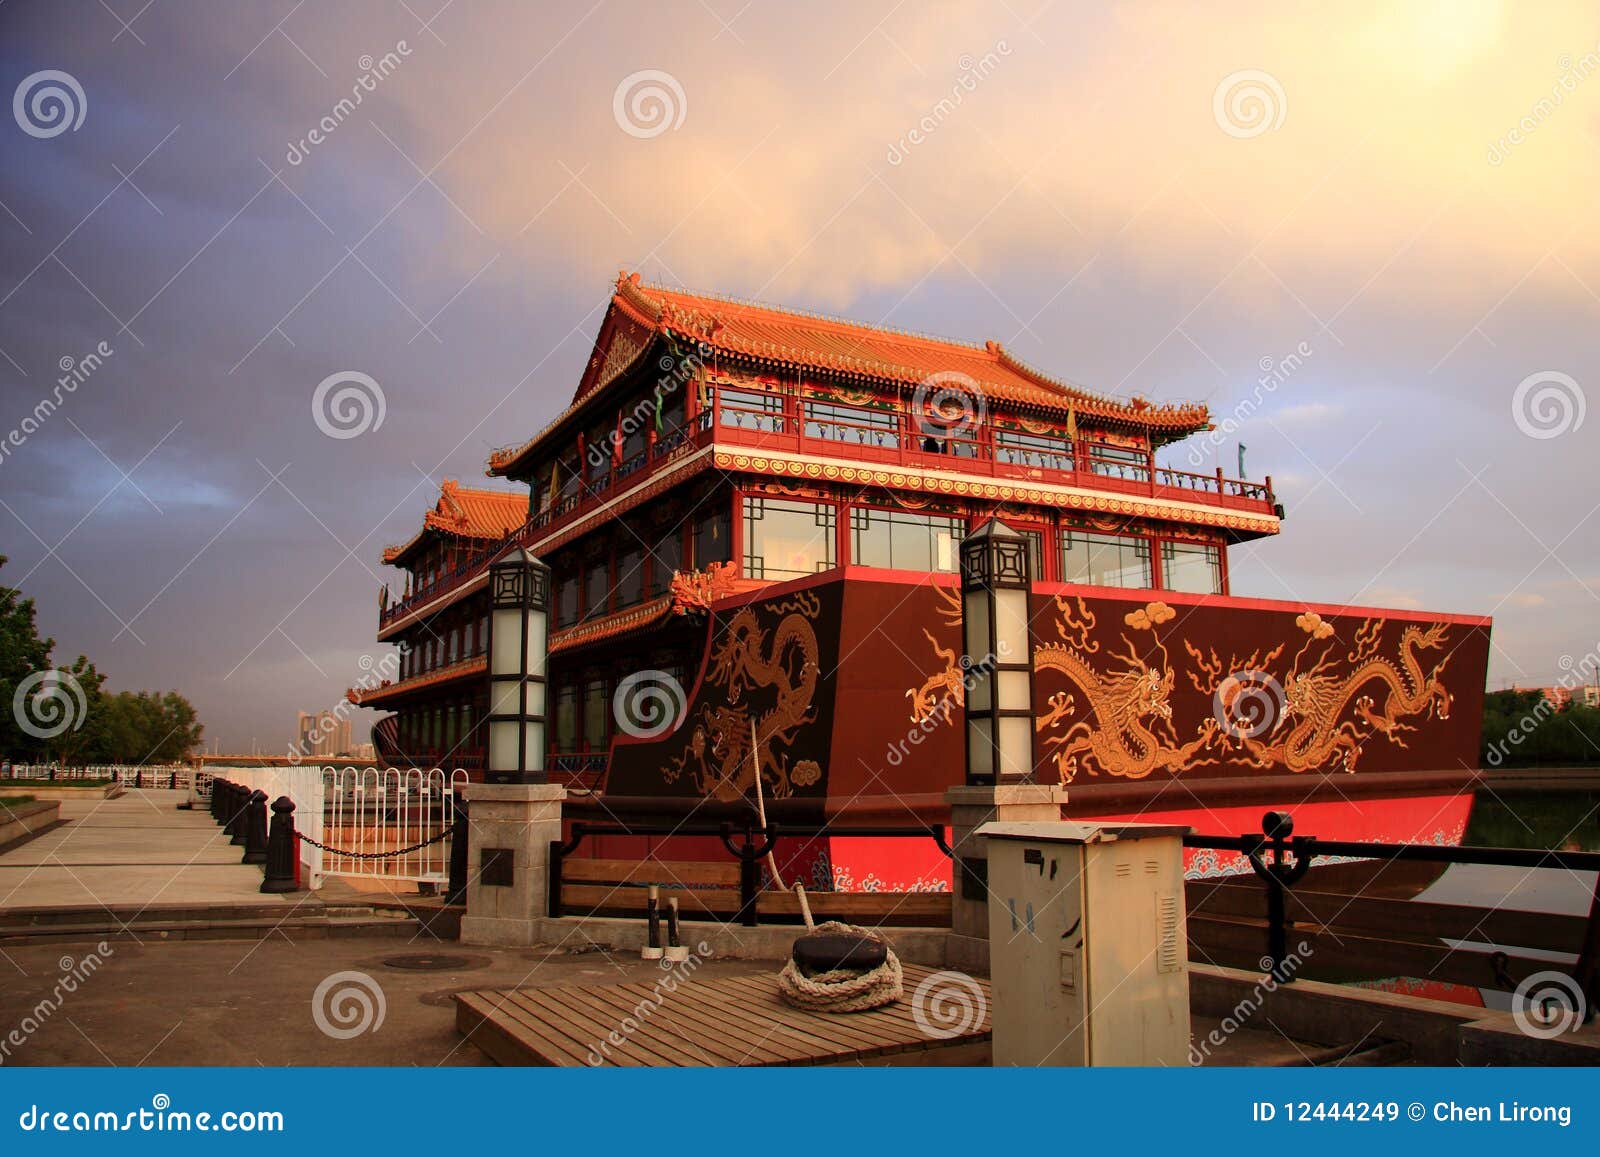 Ancient Ship Royalty Free Stock Images - Image: 12444249